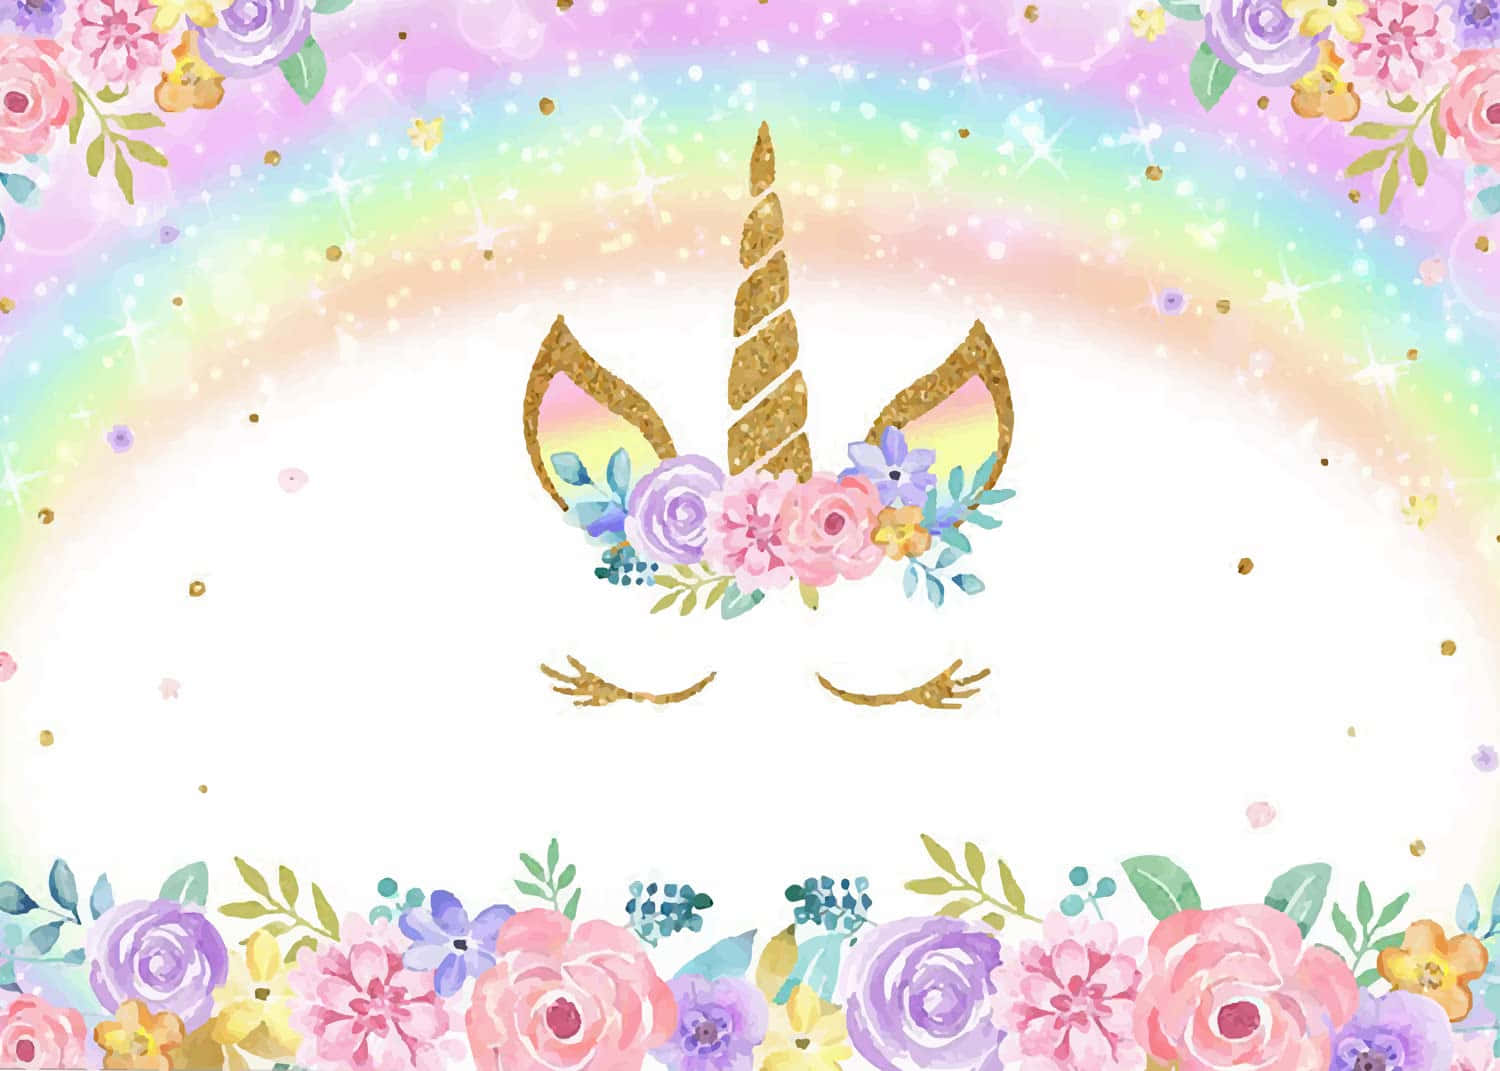 Unicorn Head With Flowers And Rainbow Background Wallpaper